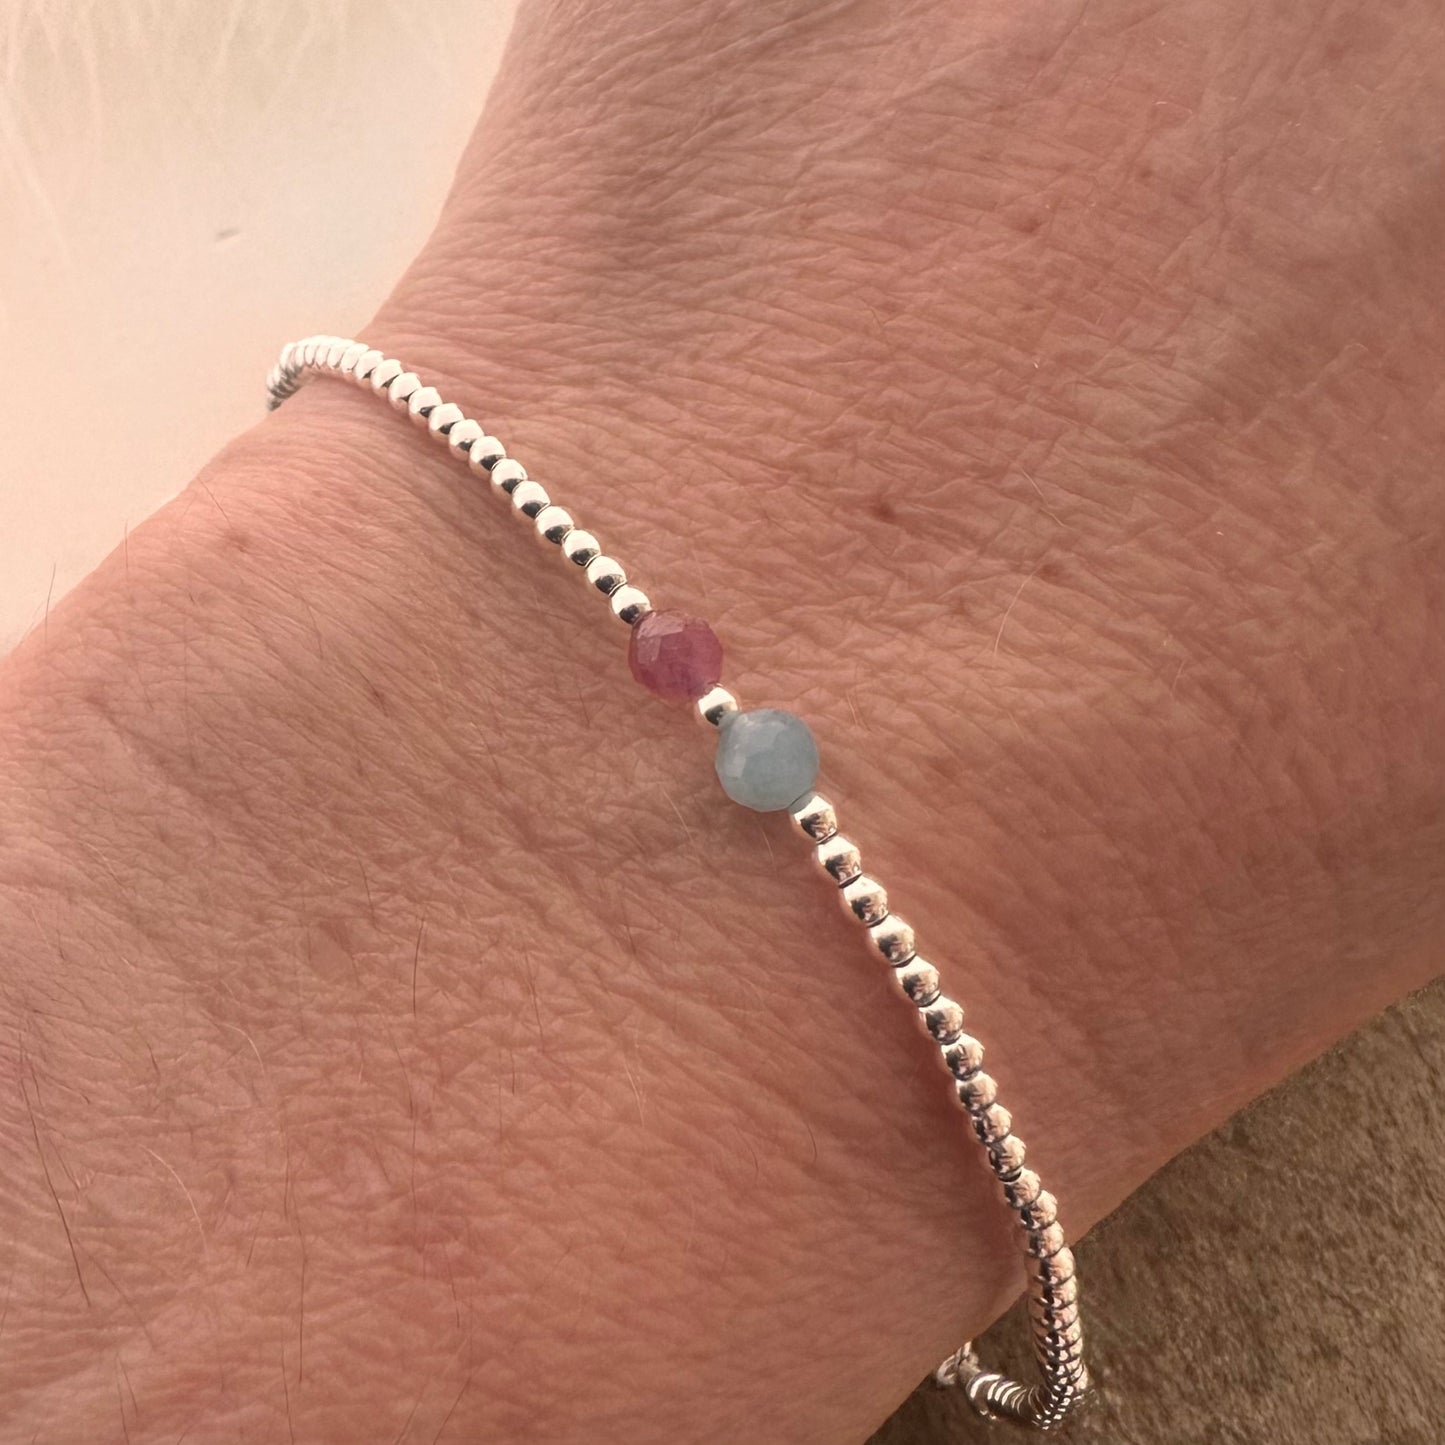 Two Birthstones Valentines Day Bracelet nft , for women in Sterling Silver, His and Hers Birthstone Bracelet